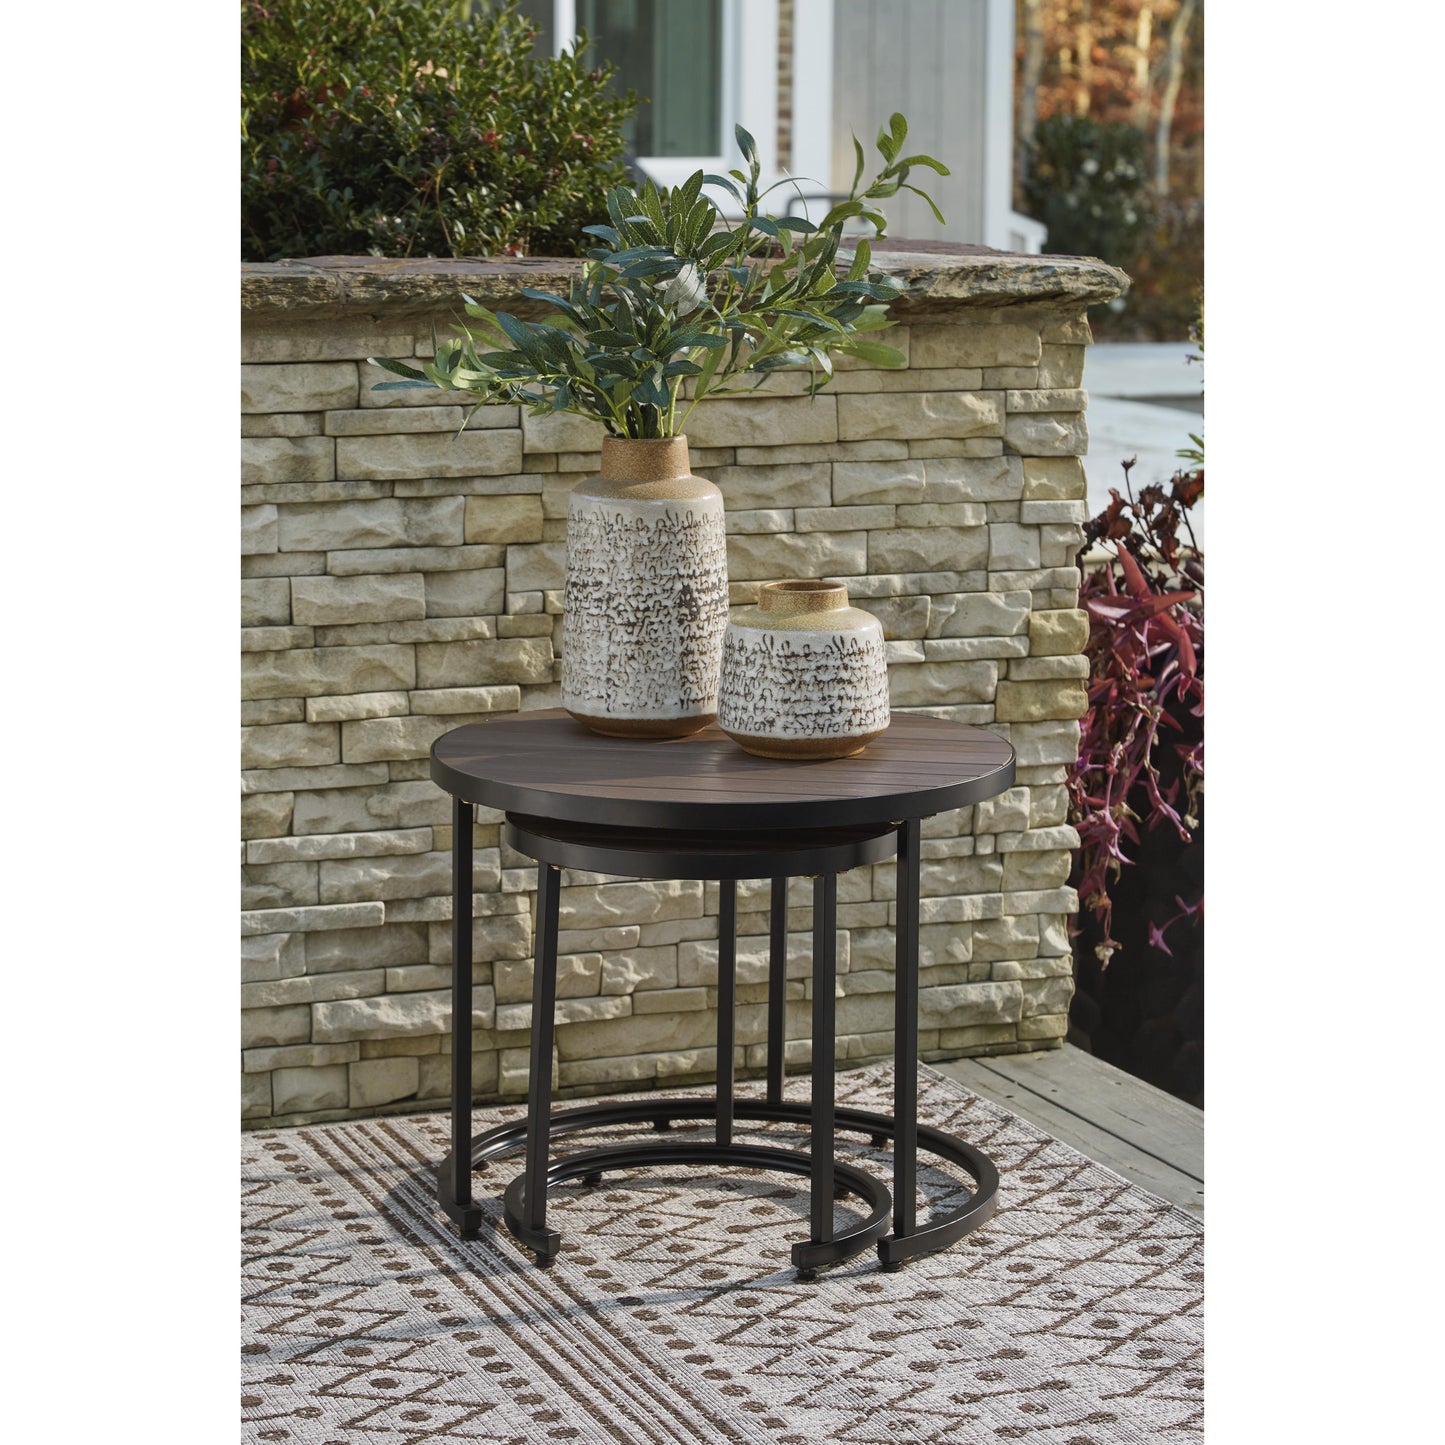 Signature Design by Ashley Outdoor Tables Nesting Tables P020-716 IMAGE 6